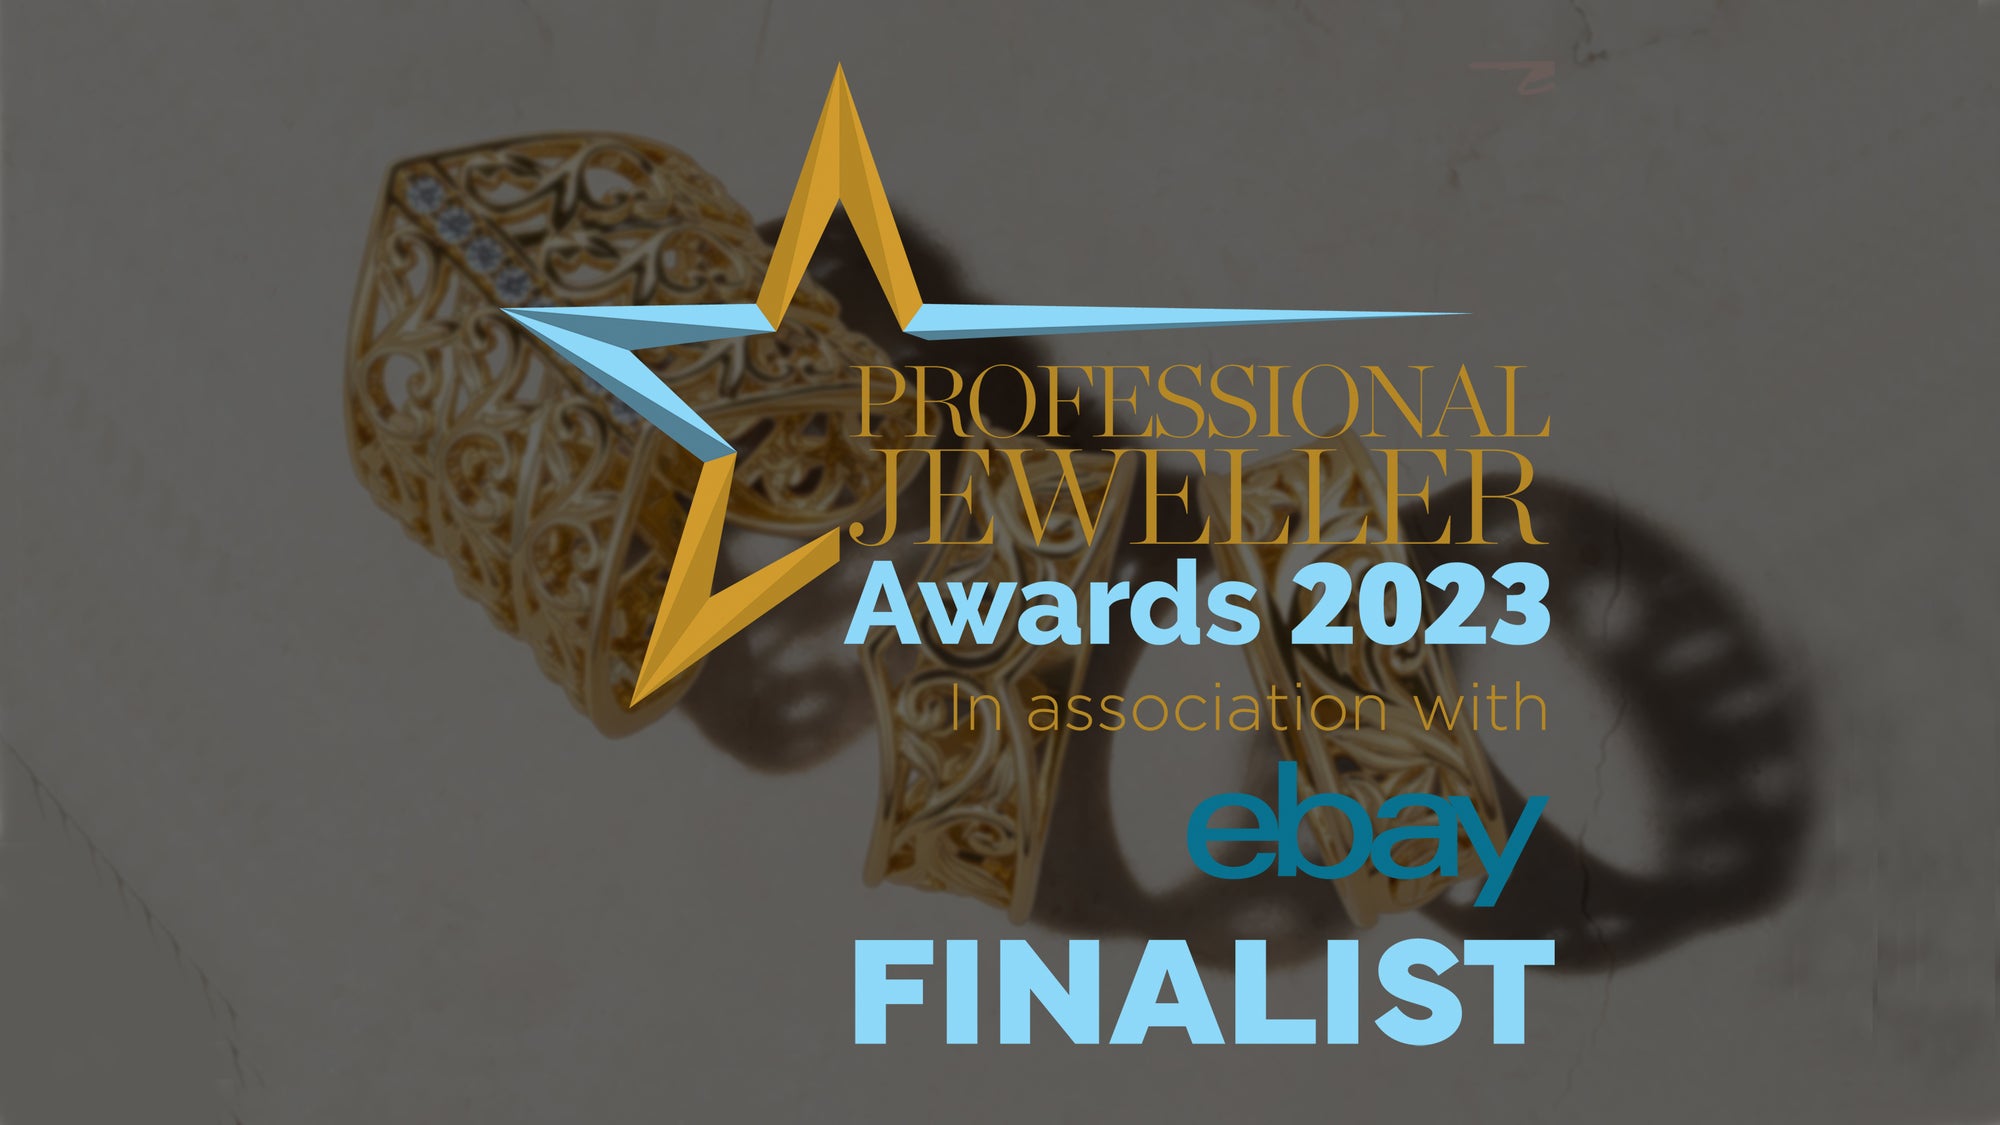 Independent ethical jewellery brand Lebrusan Studio makes its fourth award shortlist this year as finalist for Professional Jeweller’s CSR Business of the Year